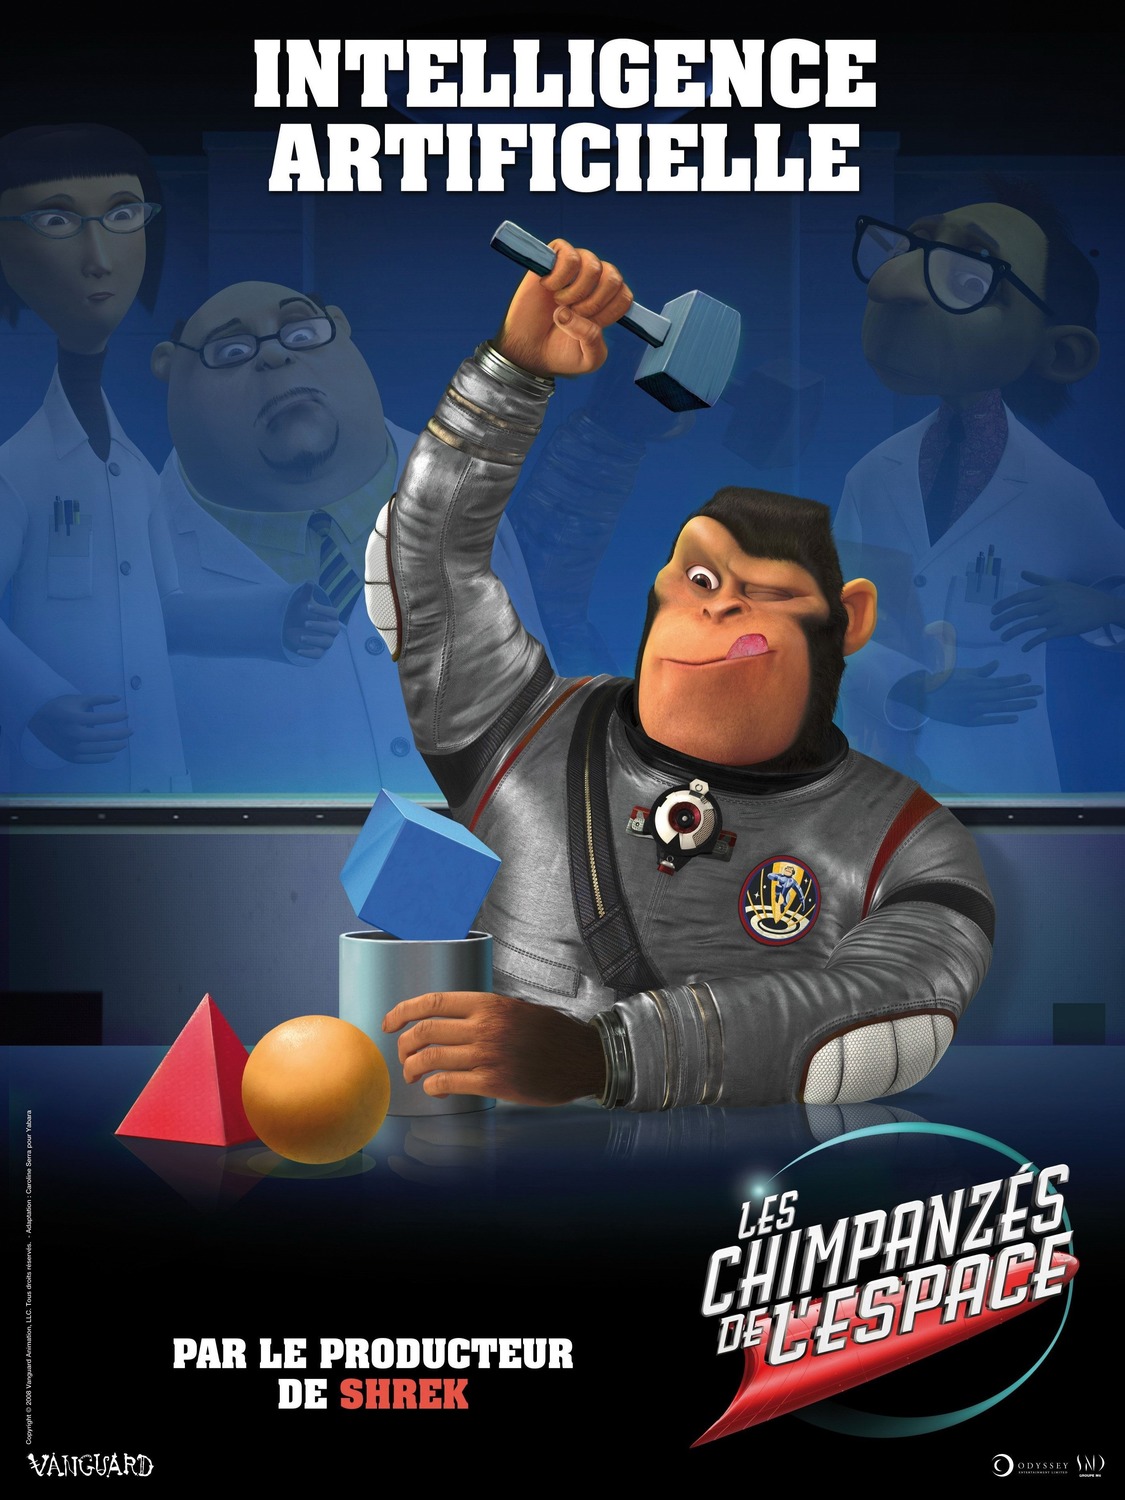 Extra Large Movie Poster Image for Space Chimps (#6 of 10)